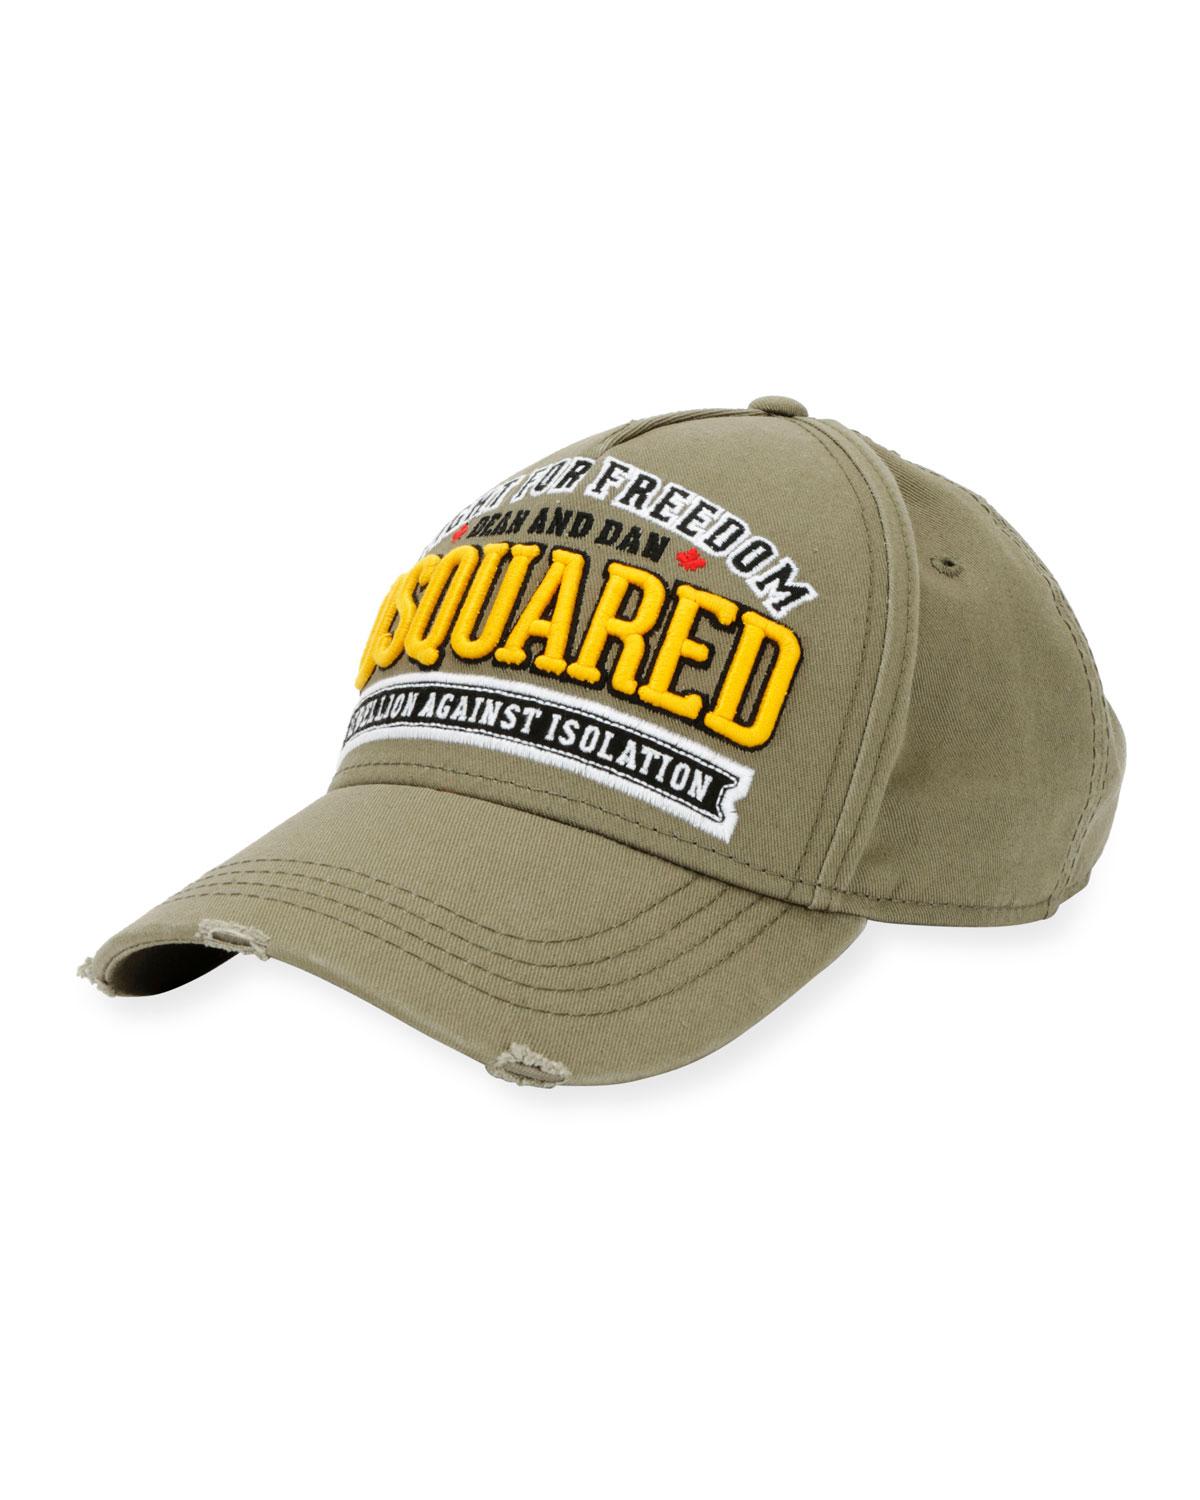 dsquared2 fight for freedom cap